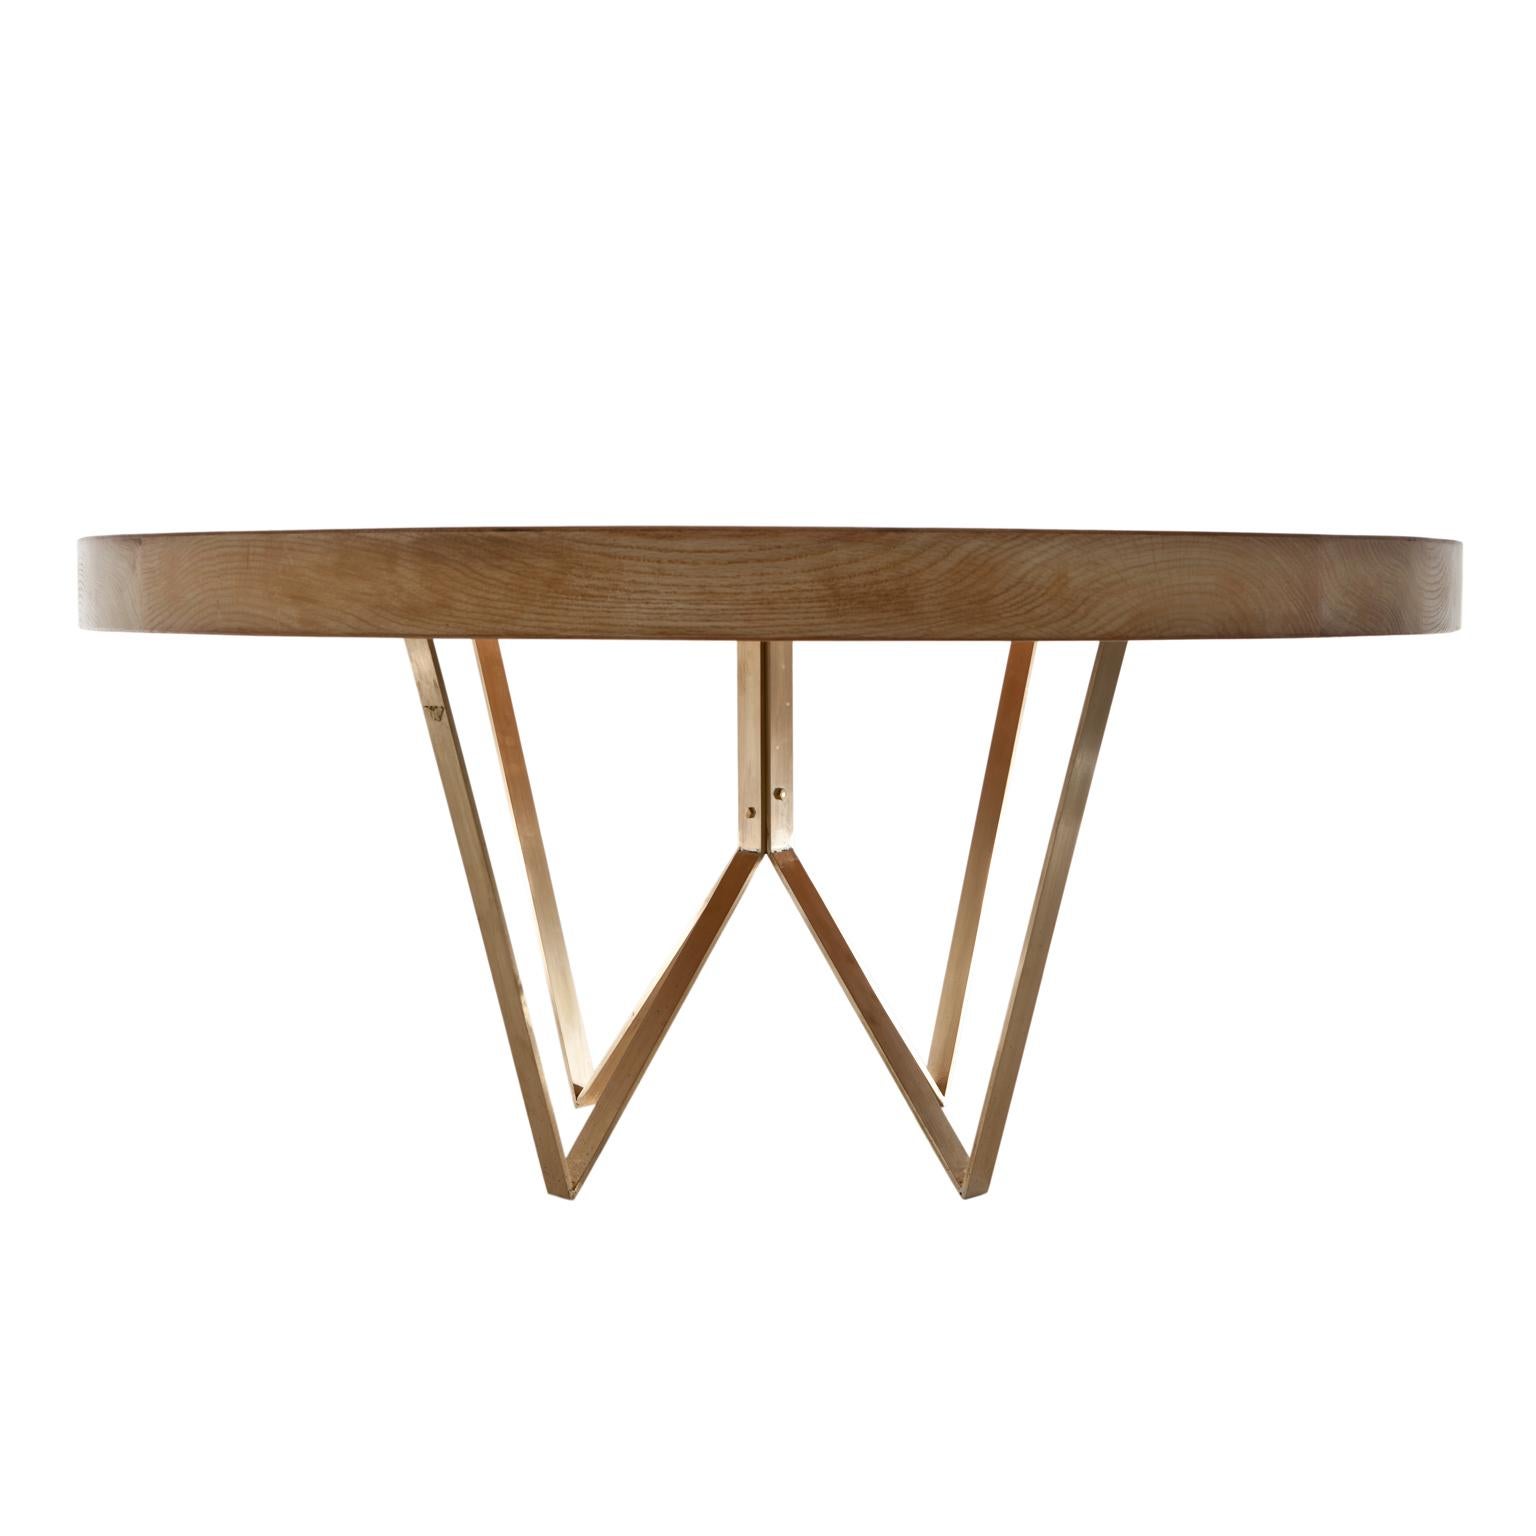 Maurits Reclaimed Oak Round Dining Table by Fred and Juul
Dimensions: Ø 160 x H 78 cm.
Materials: Reclaimed oak and brass.

Available in round or stadium shape. Also available in different materials. Custom sizes, materials or finishes are